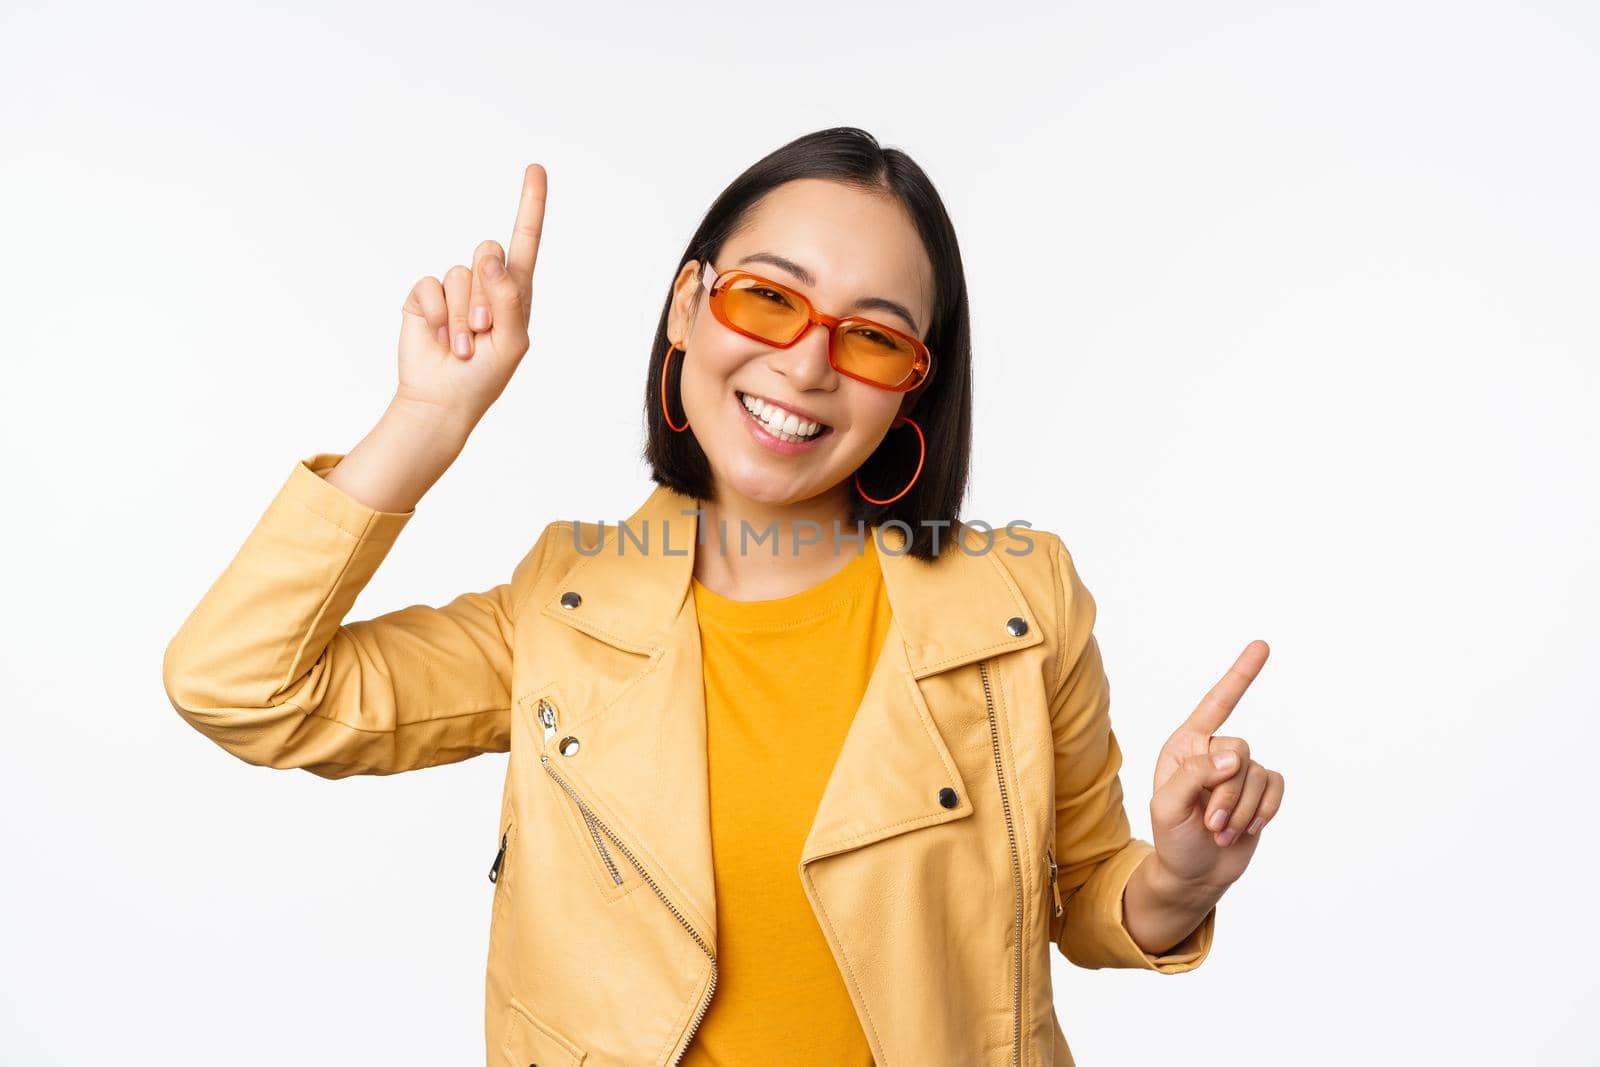 Smiling asian brunette woman in sunglasses, pointing fingers sideways, left and right, showing variants, laughing and dancing, wearing sunglasses, white background.